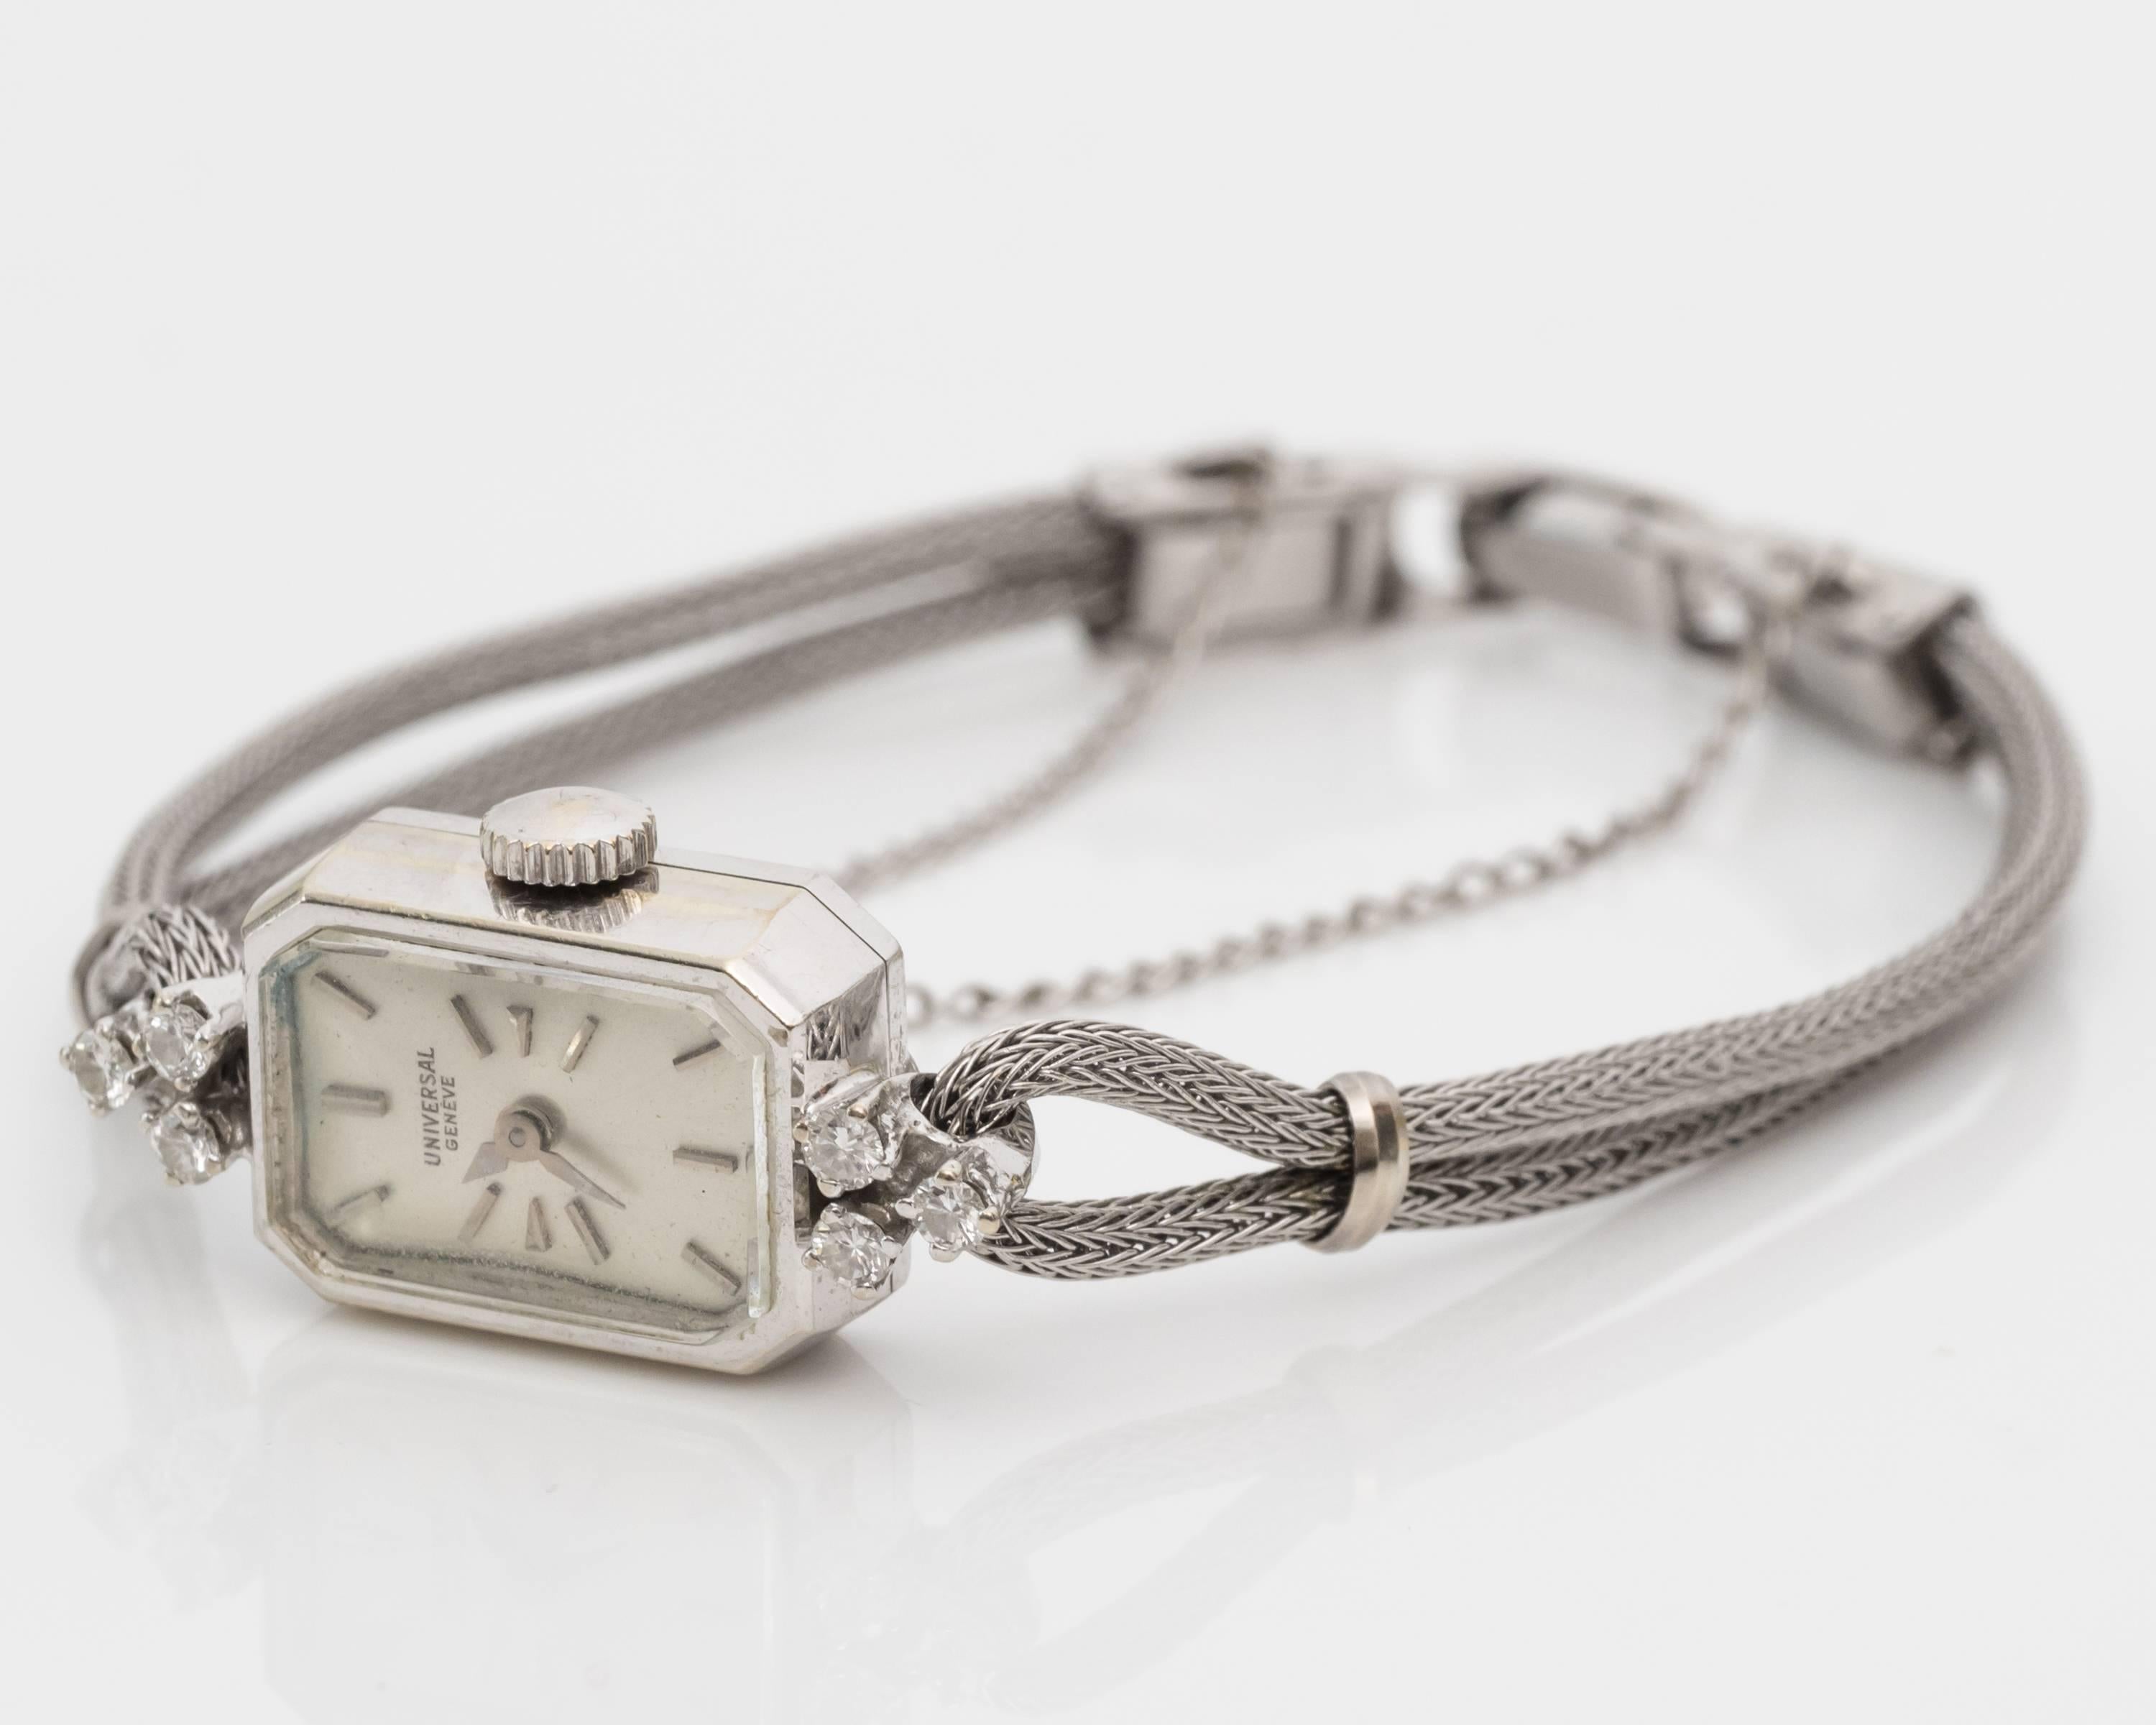 1950s Women's Wristwatch, Simple yet Stunning design! 
Swiss made, Universal Brand (Hallmark UNIVERSAL GENEVE SWISS is written next to the dial)
Features three diamonds set in a cluster on each end of the watch (6 diamonds total); Diamonds total to